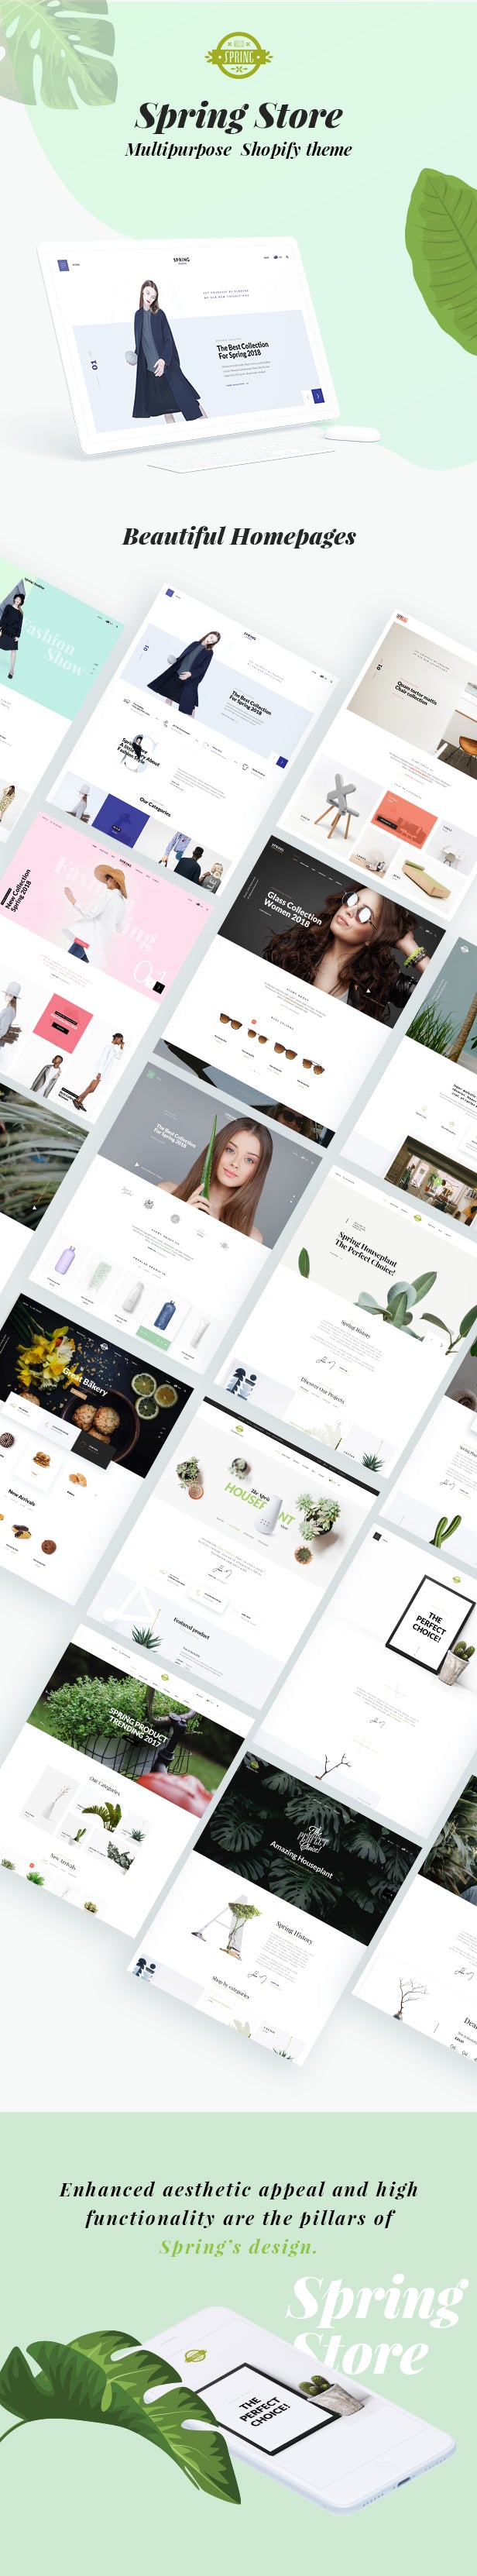 Shopify theme spring features